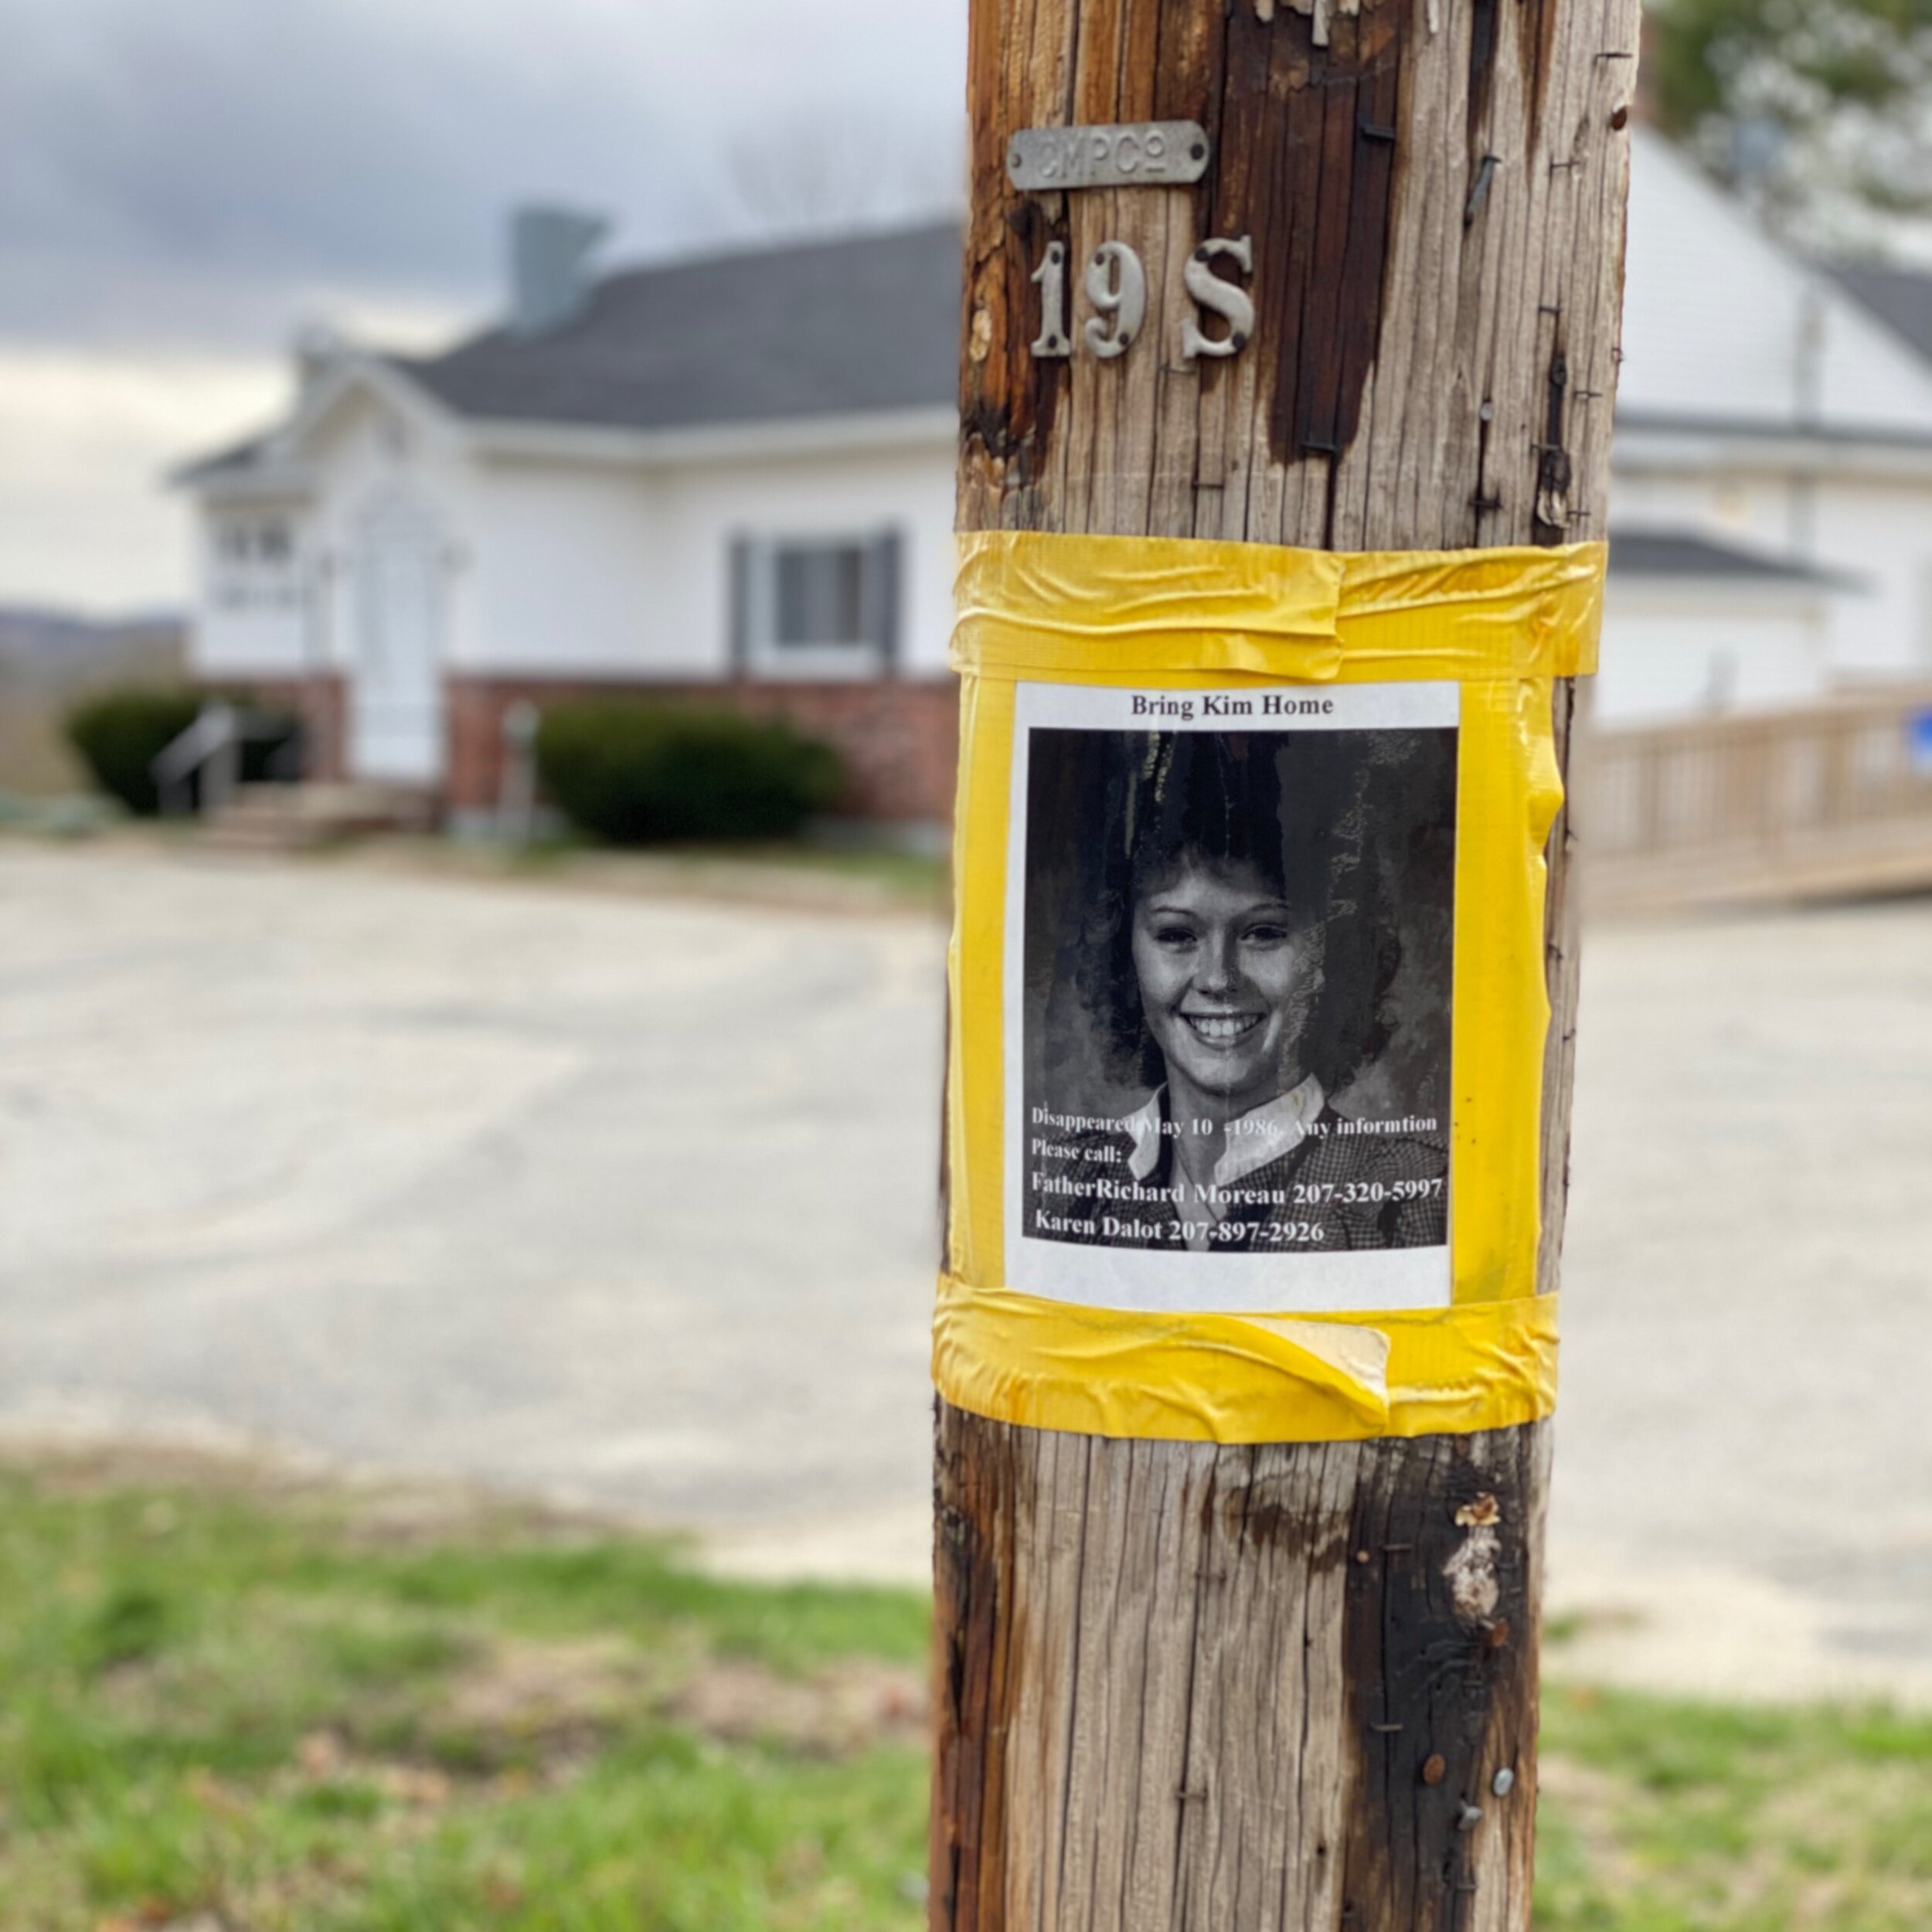 Kim's missing poster on a pole in 2021.